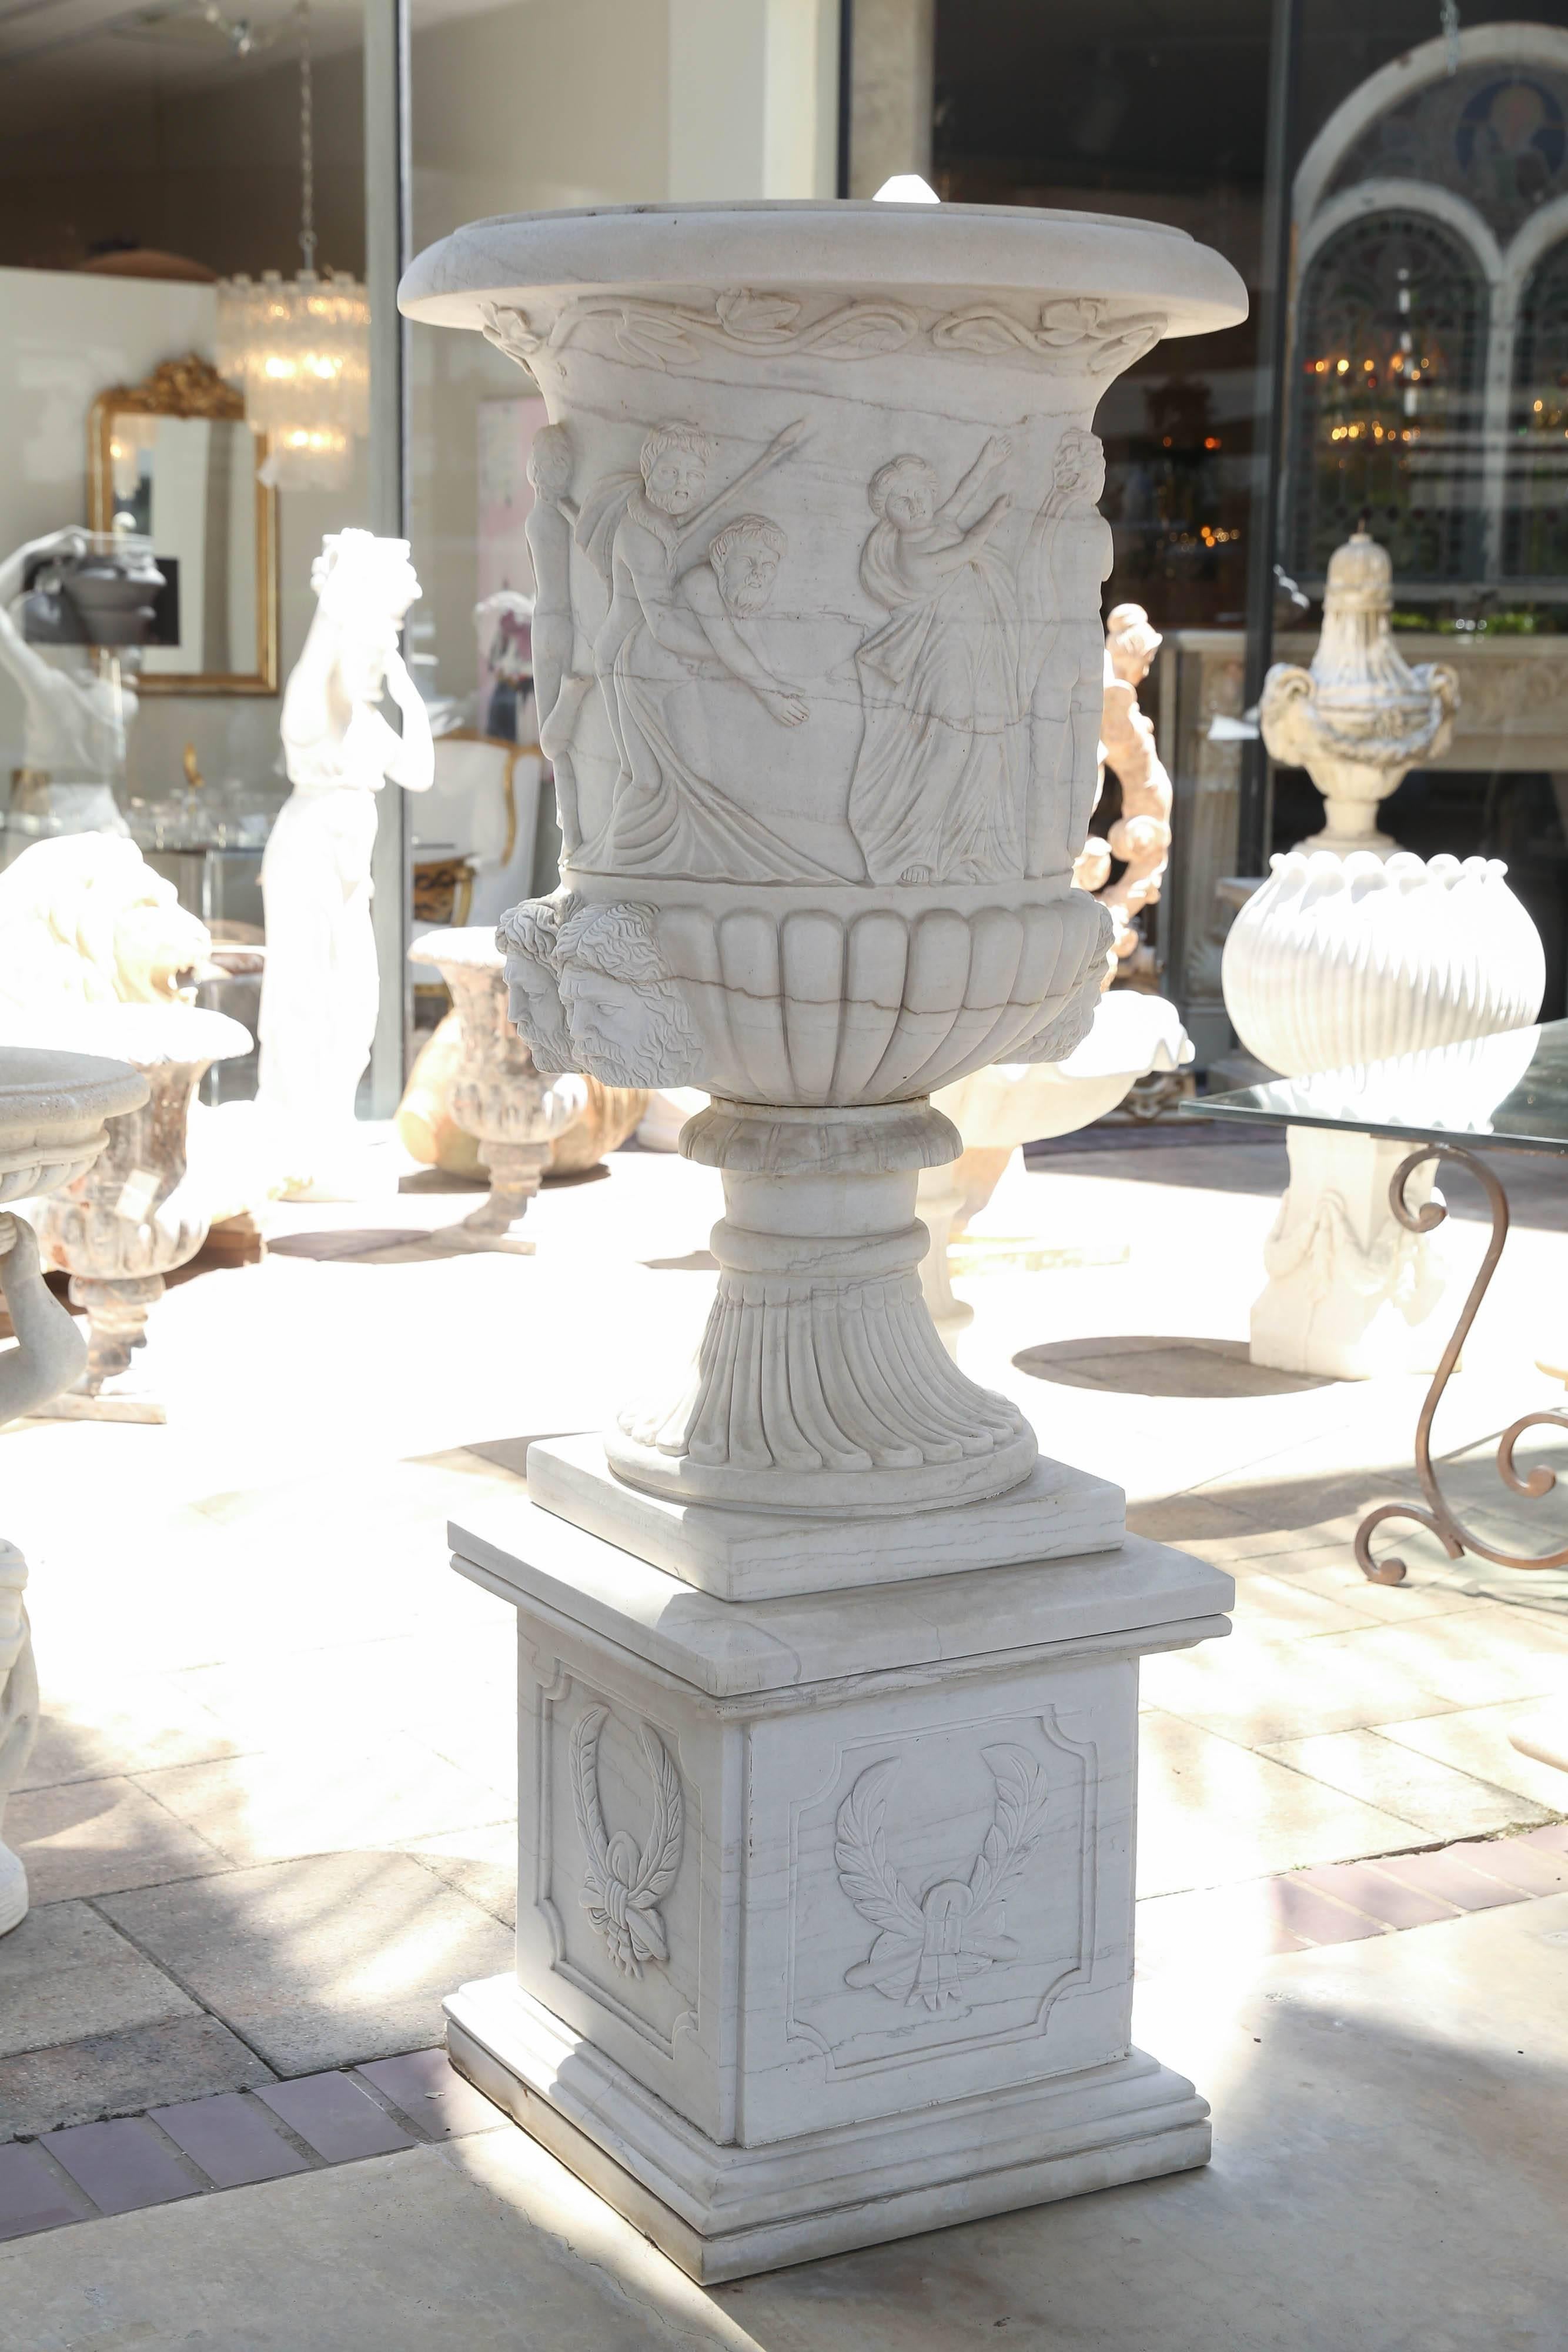 Large and beautifully carved planters resting on pedestals
of the same marble. The planters carved with lovely
classical figures. Carved both wind faces adorn each side.